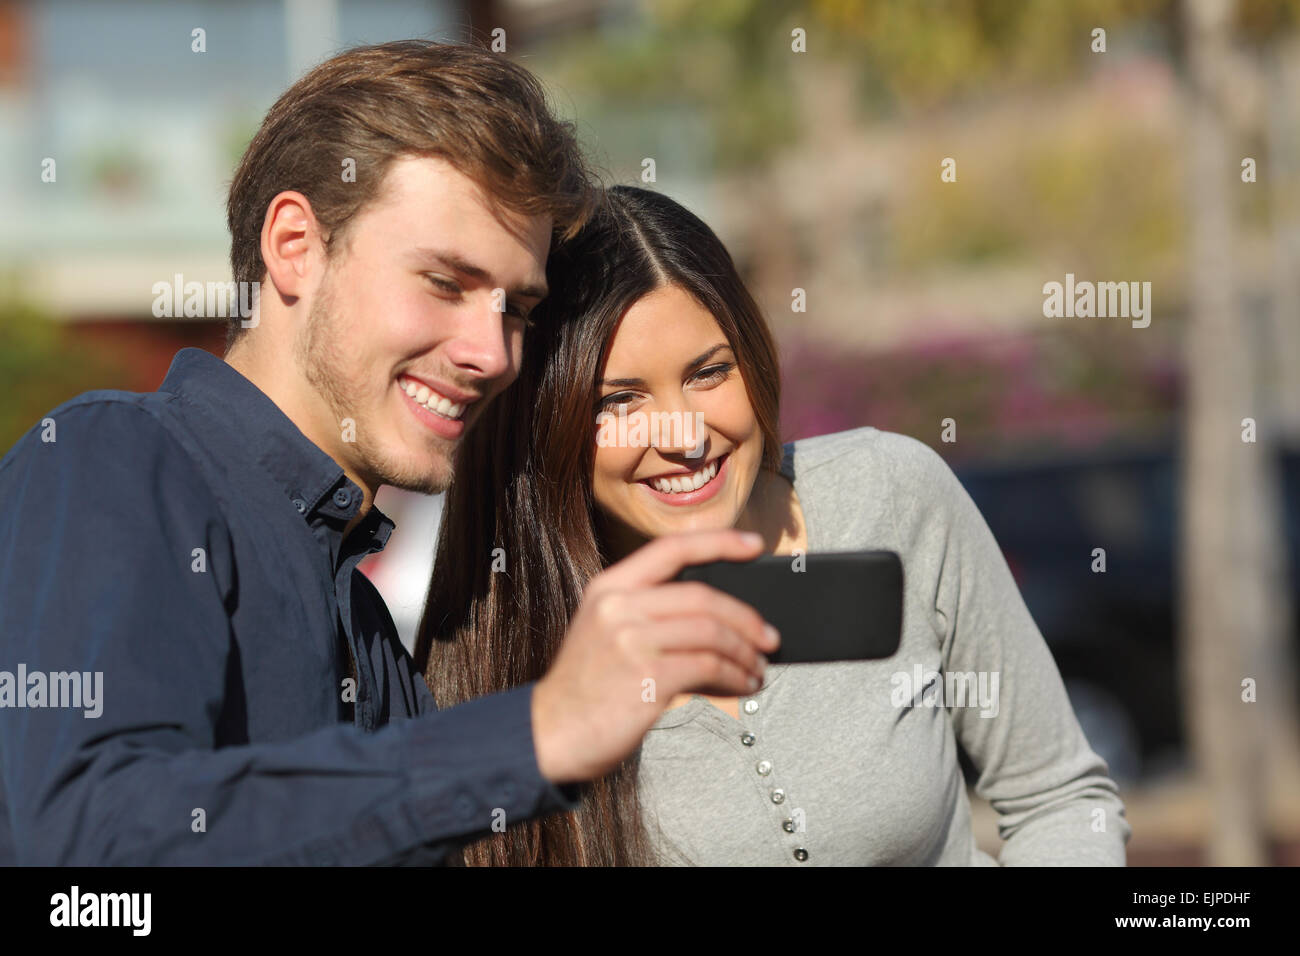 Happy couple watching media in a smart phone outdoors with an urban background Stock Photo